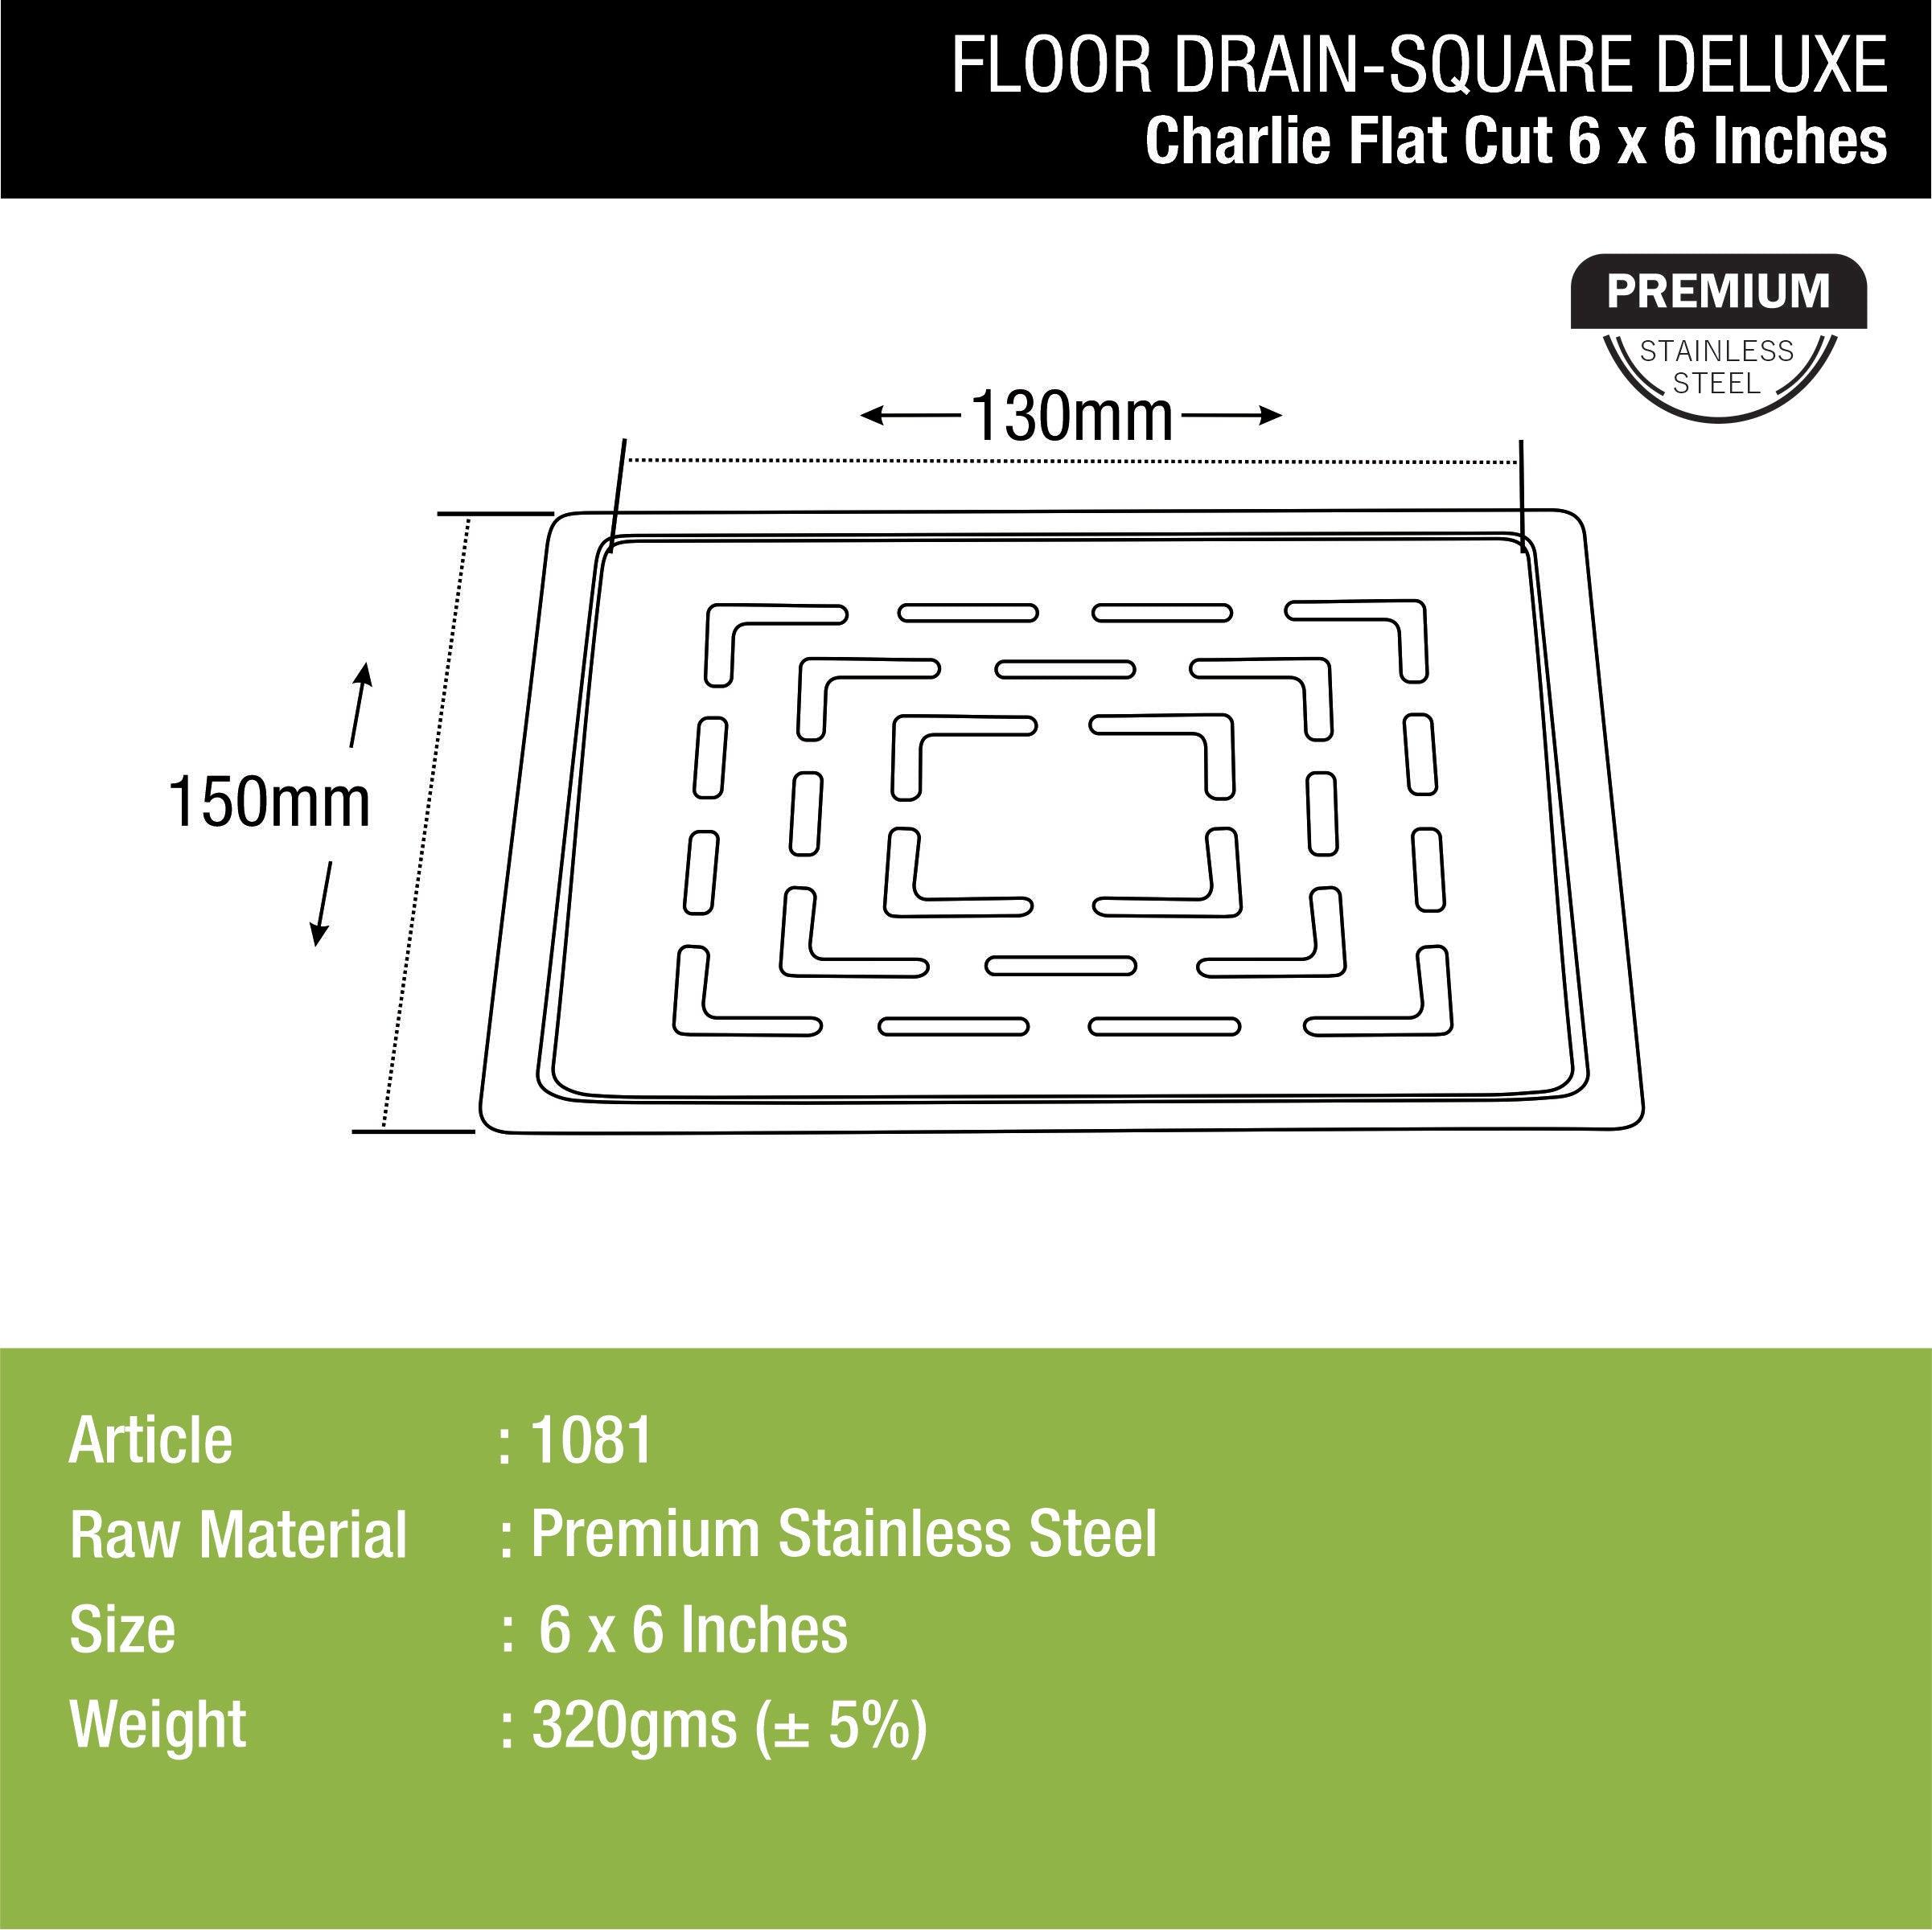 Charlie Deluxe Square Flat Cut Floor Drain (6 x 6) dimensions and sizes